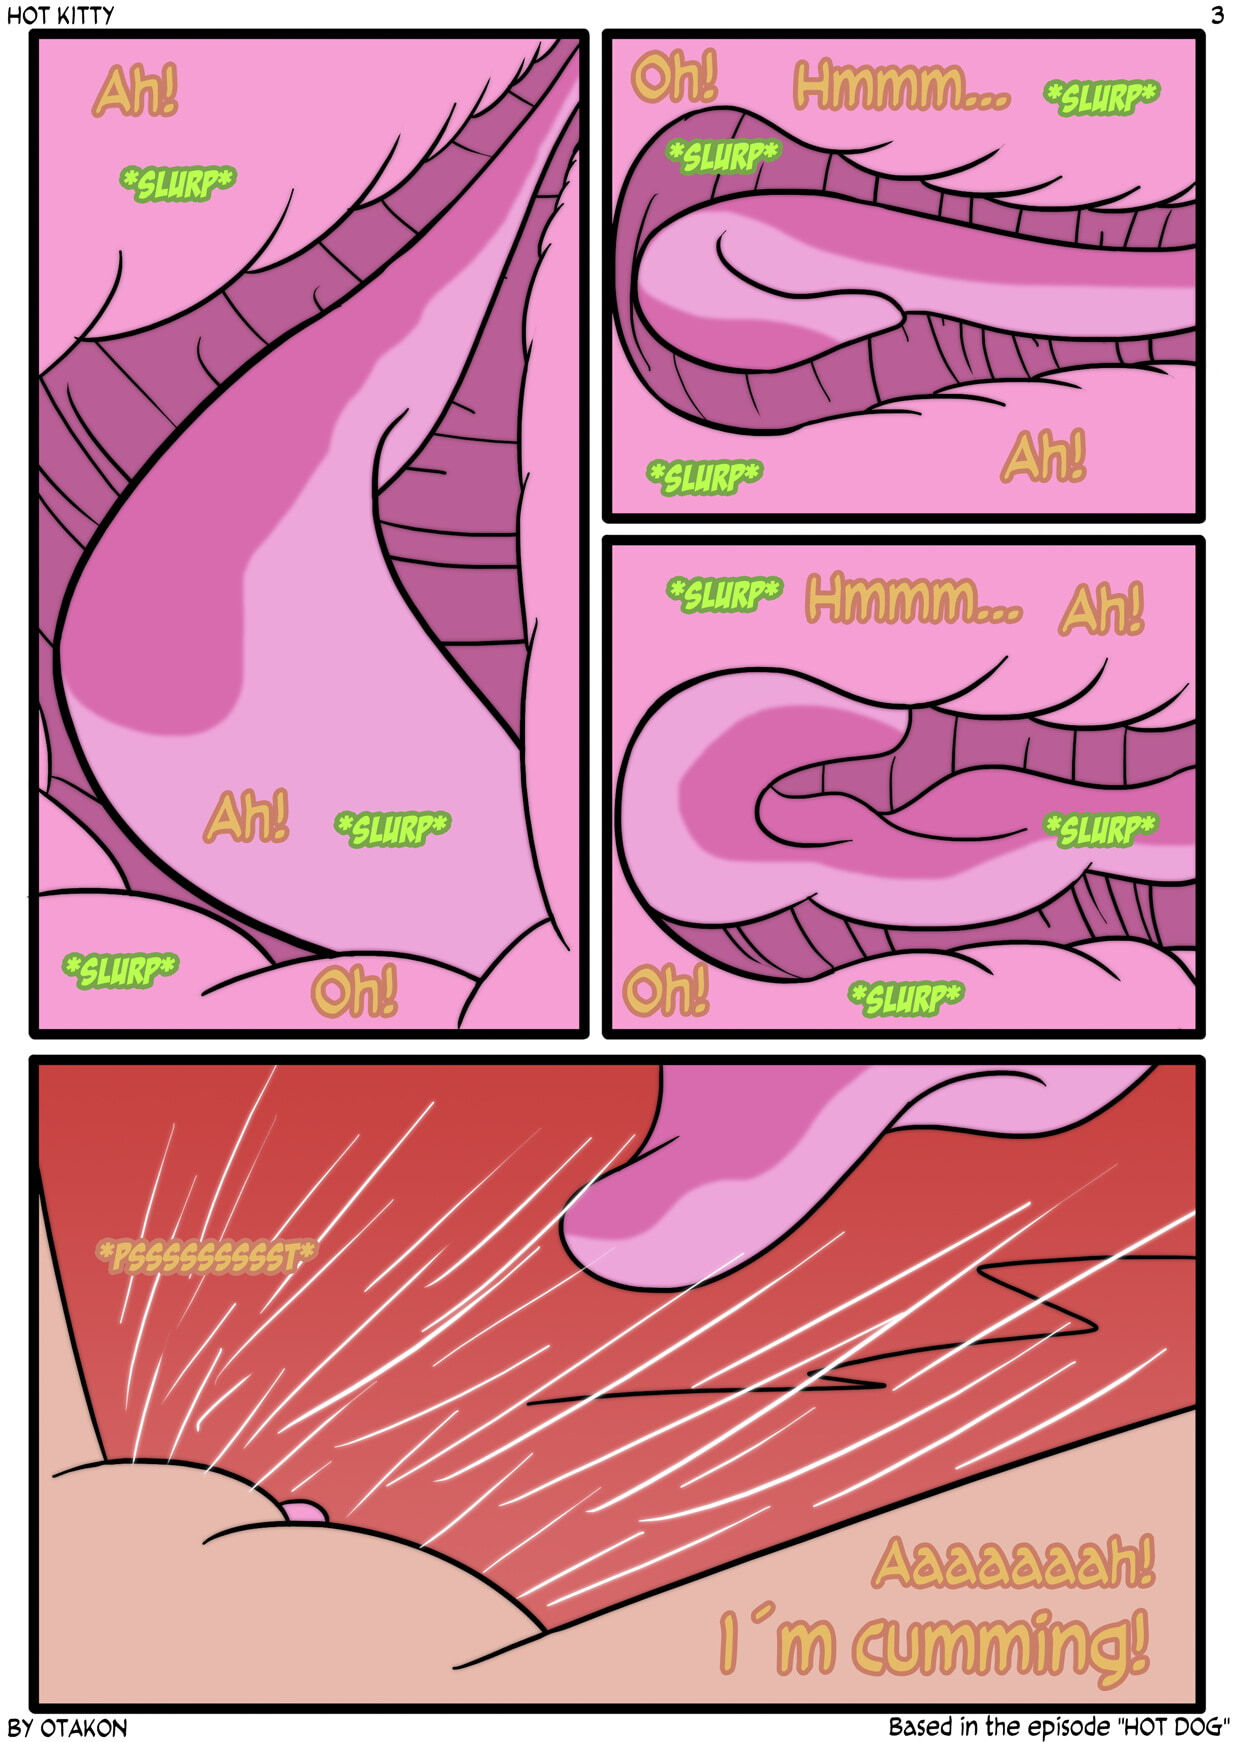 Hot Kitty - Page 8